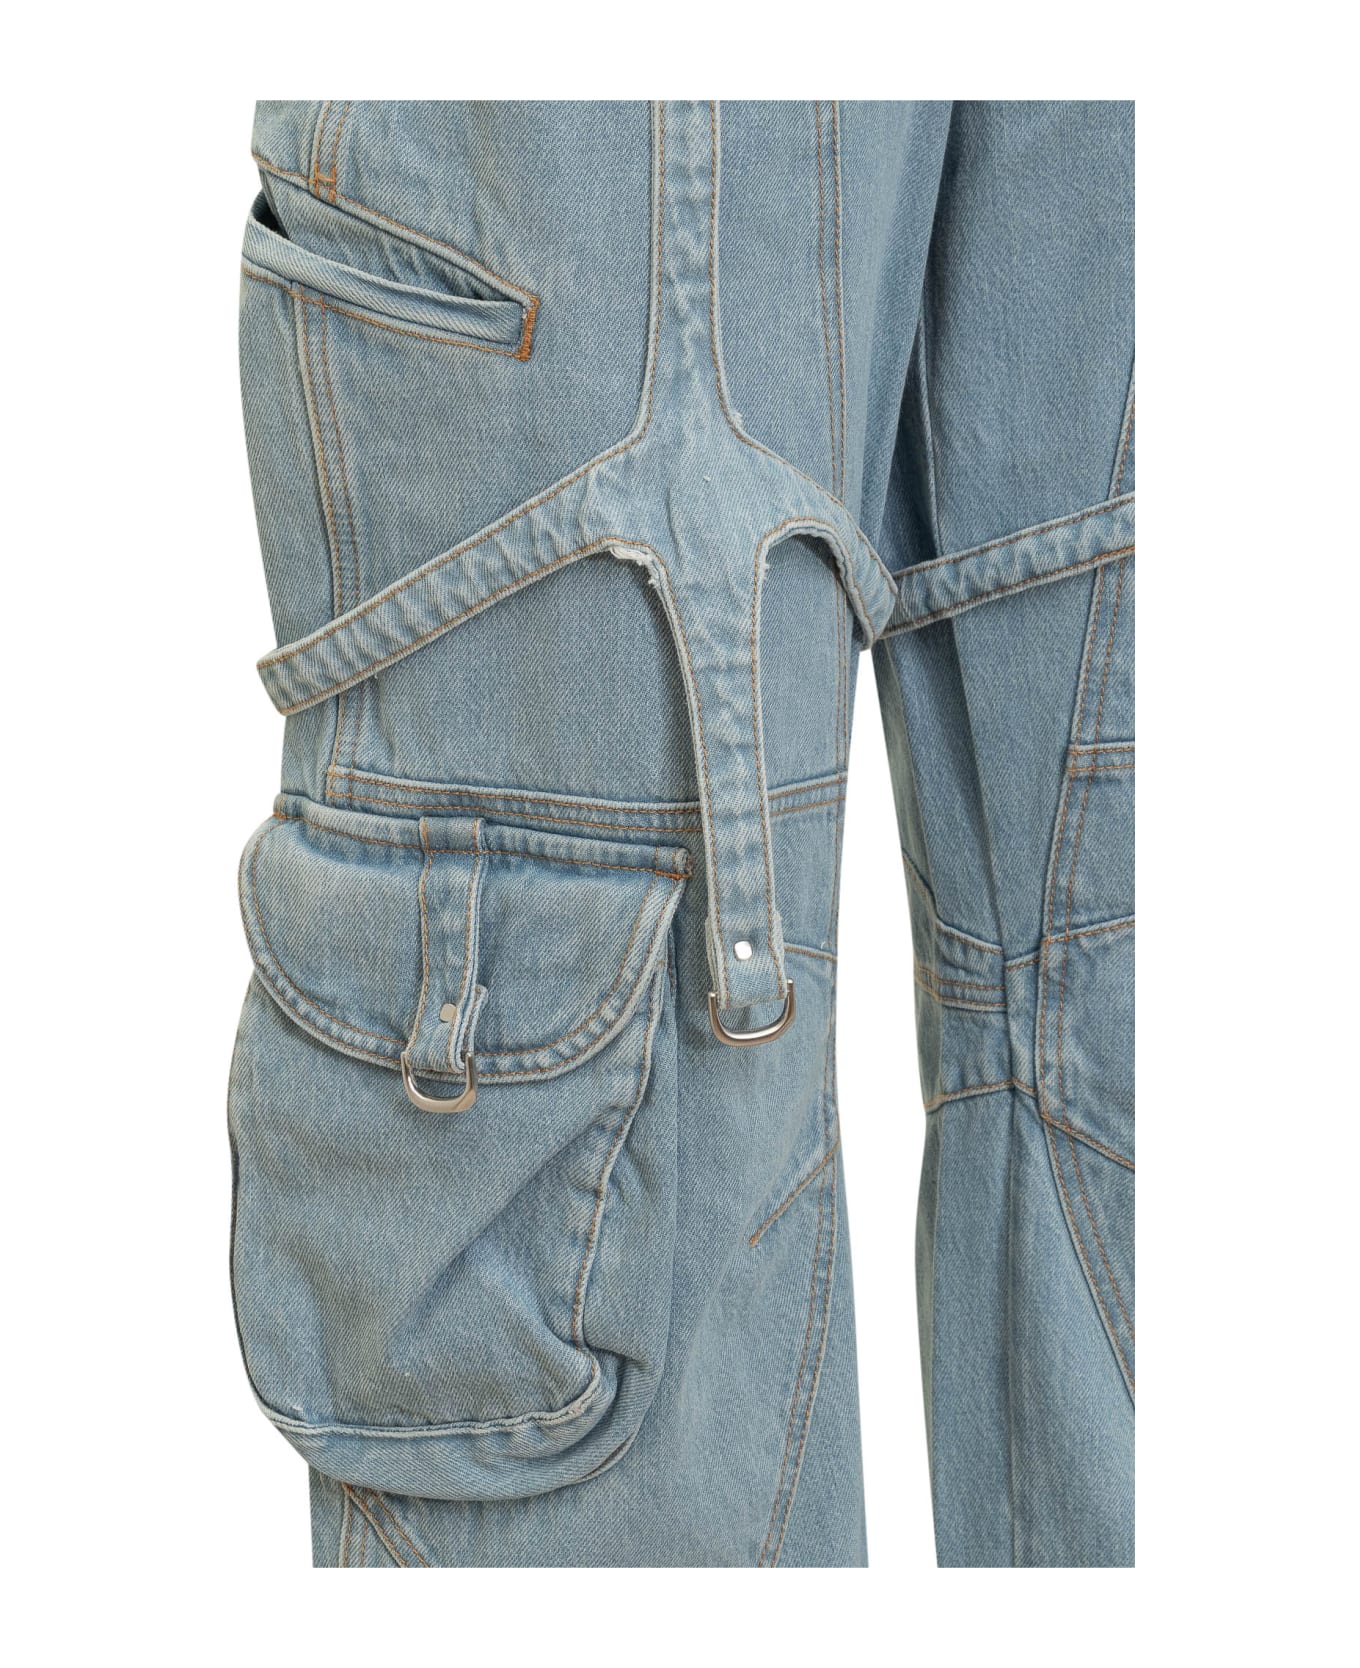 Off-White Bleached Cargo Jeans - LIGHT BLUE デニム